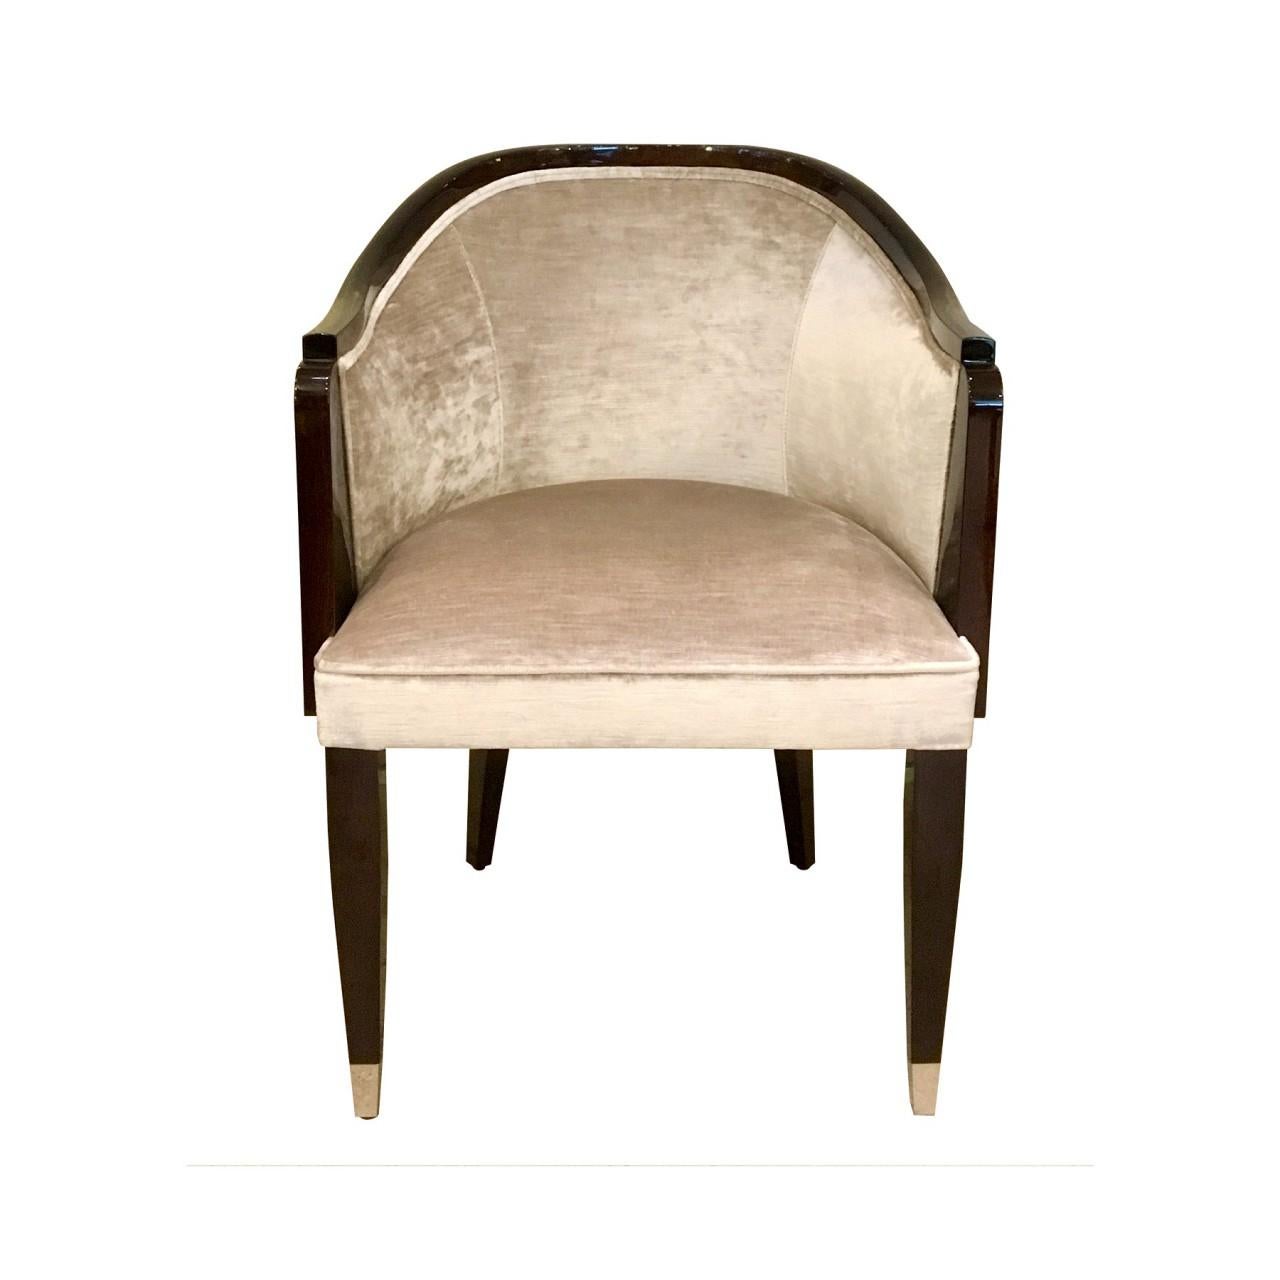 An early Art Deco style bergere chair with slightly slopped arms; it beautifully pulls up to dining tables or writing desks. Solid wood frame in warm walnut high gloss finish, upholstered in a soft creamy silver velvet. Nickel Sabots on front